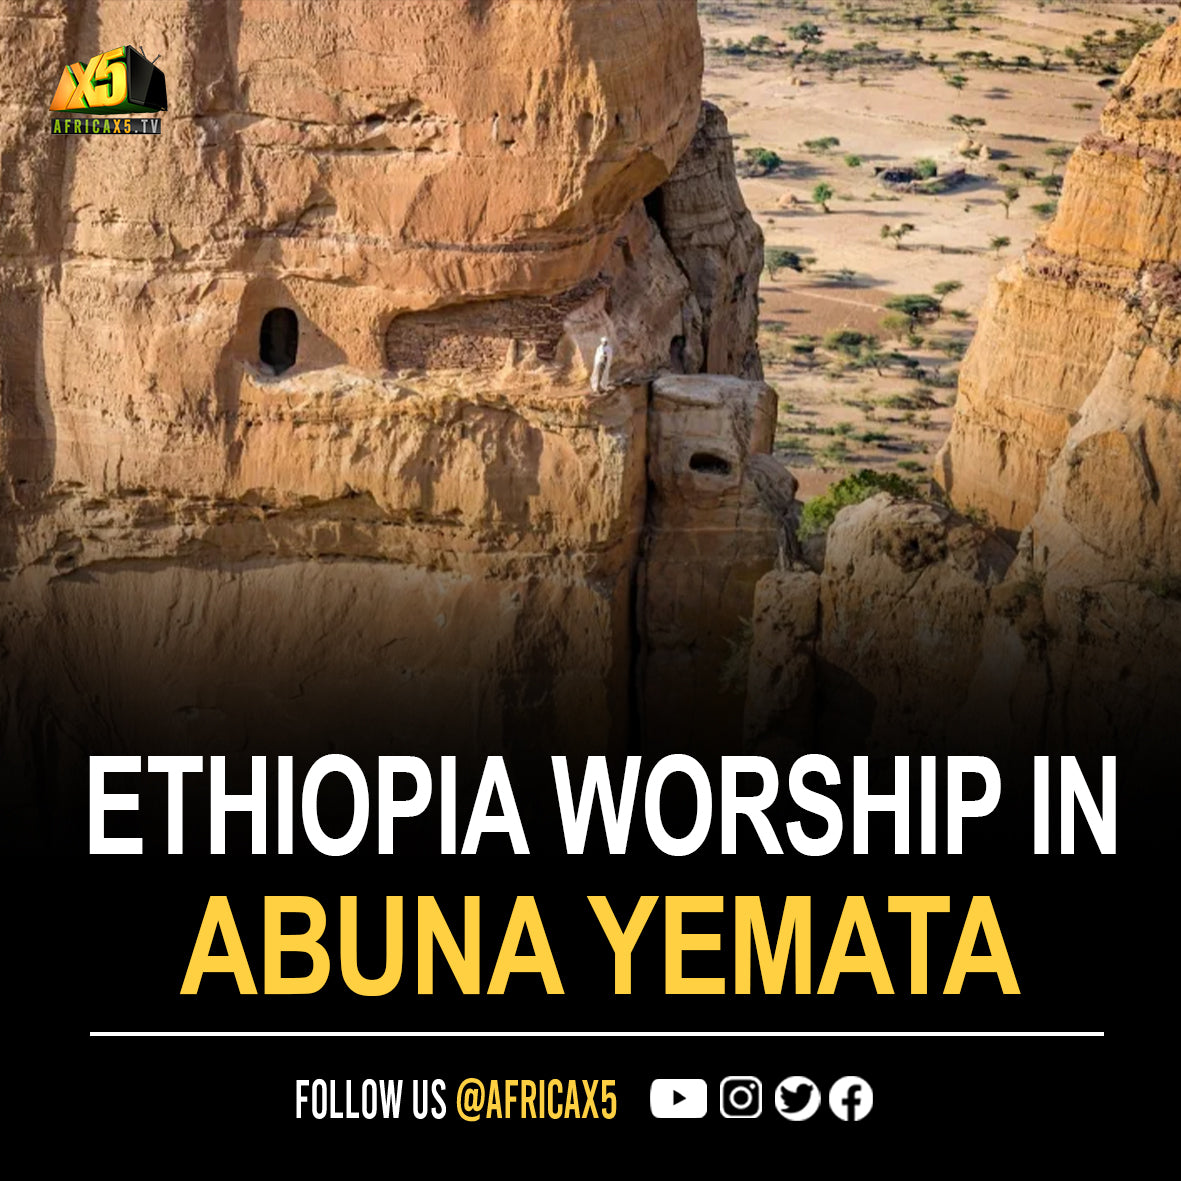 Ethiopia's 'Abuna Yemata Guh' is arguably the most inaccessible place of worship on earth and has to be climbed on foot to reach.